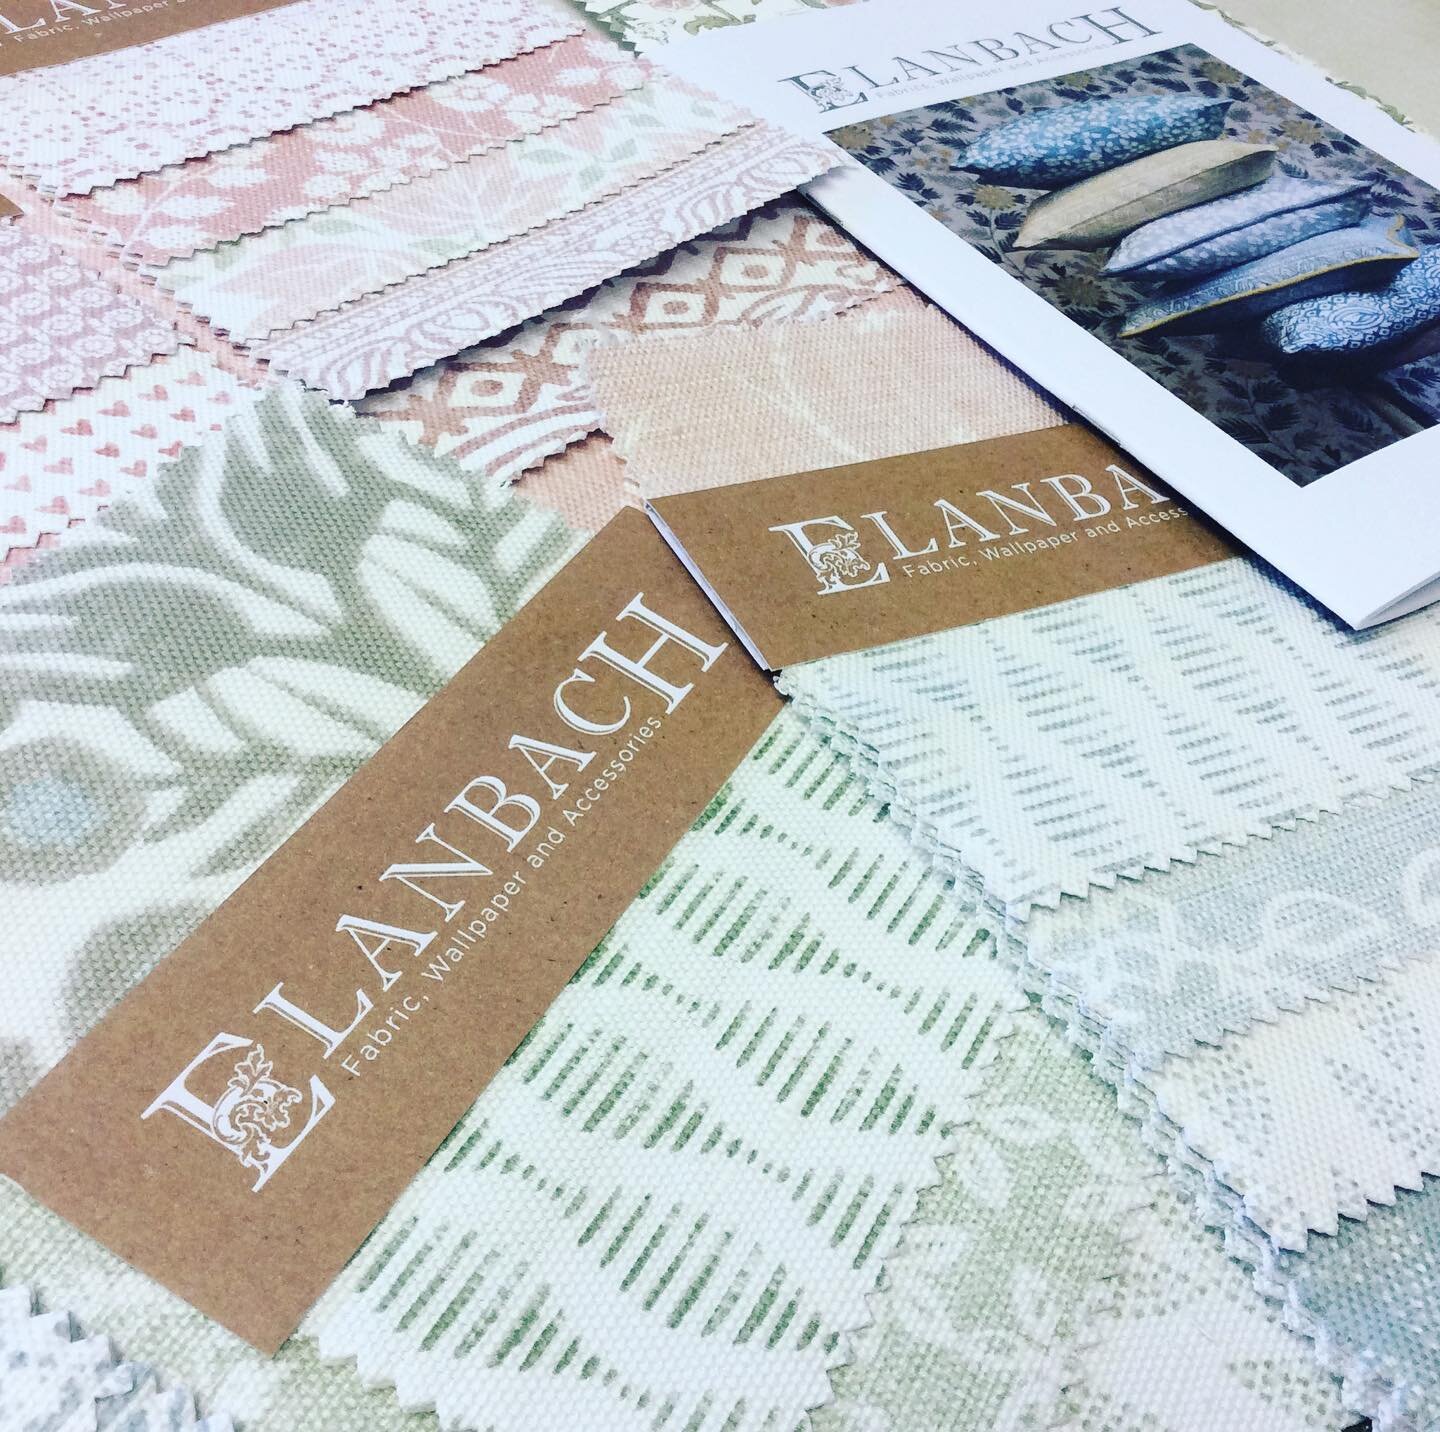 We love Elanbach printed in the Uk .
We make in the Uk, why not get a quotation from us .curtainsbyrae@gmail.com